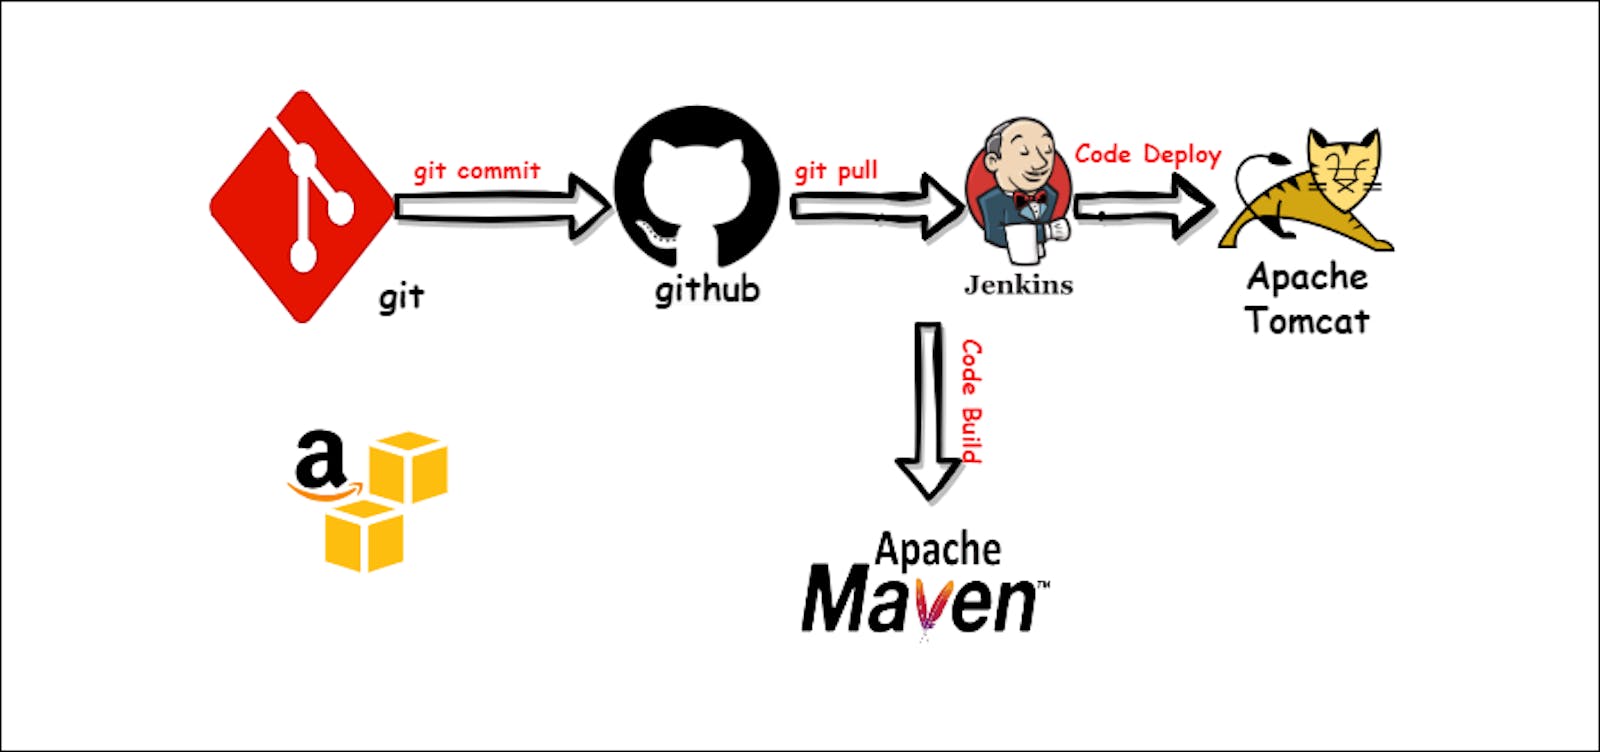 Setting Up a CI/CD Pipeline with Jenkins, Maven, and Tomcat on AWS EC2 Instances running Ubuntu